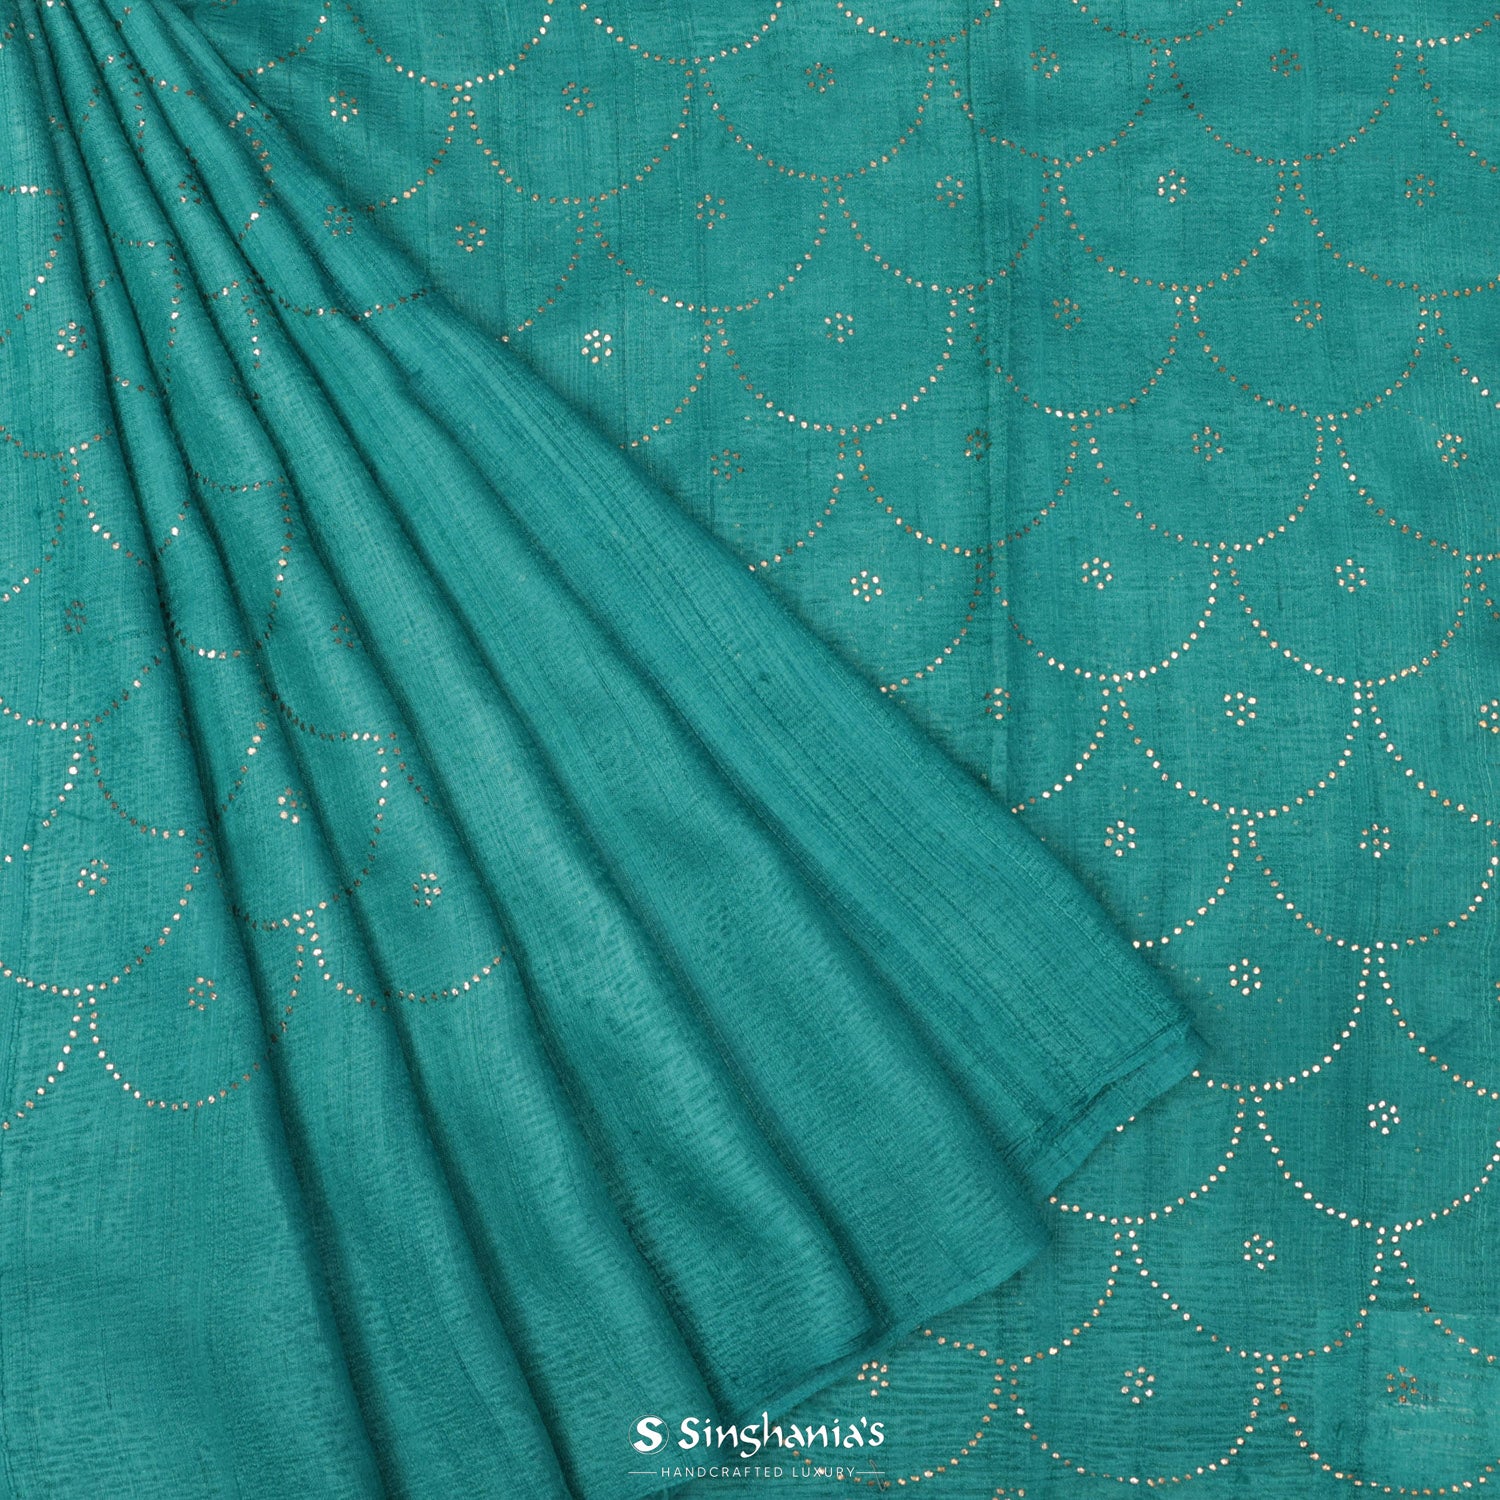 Medium Turquoise Blue Tussar Saree With Foil Print In Grid Pattern